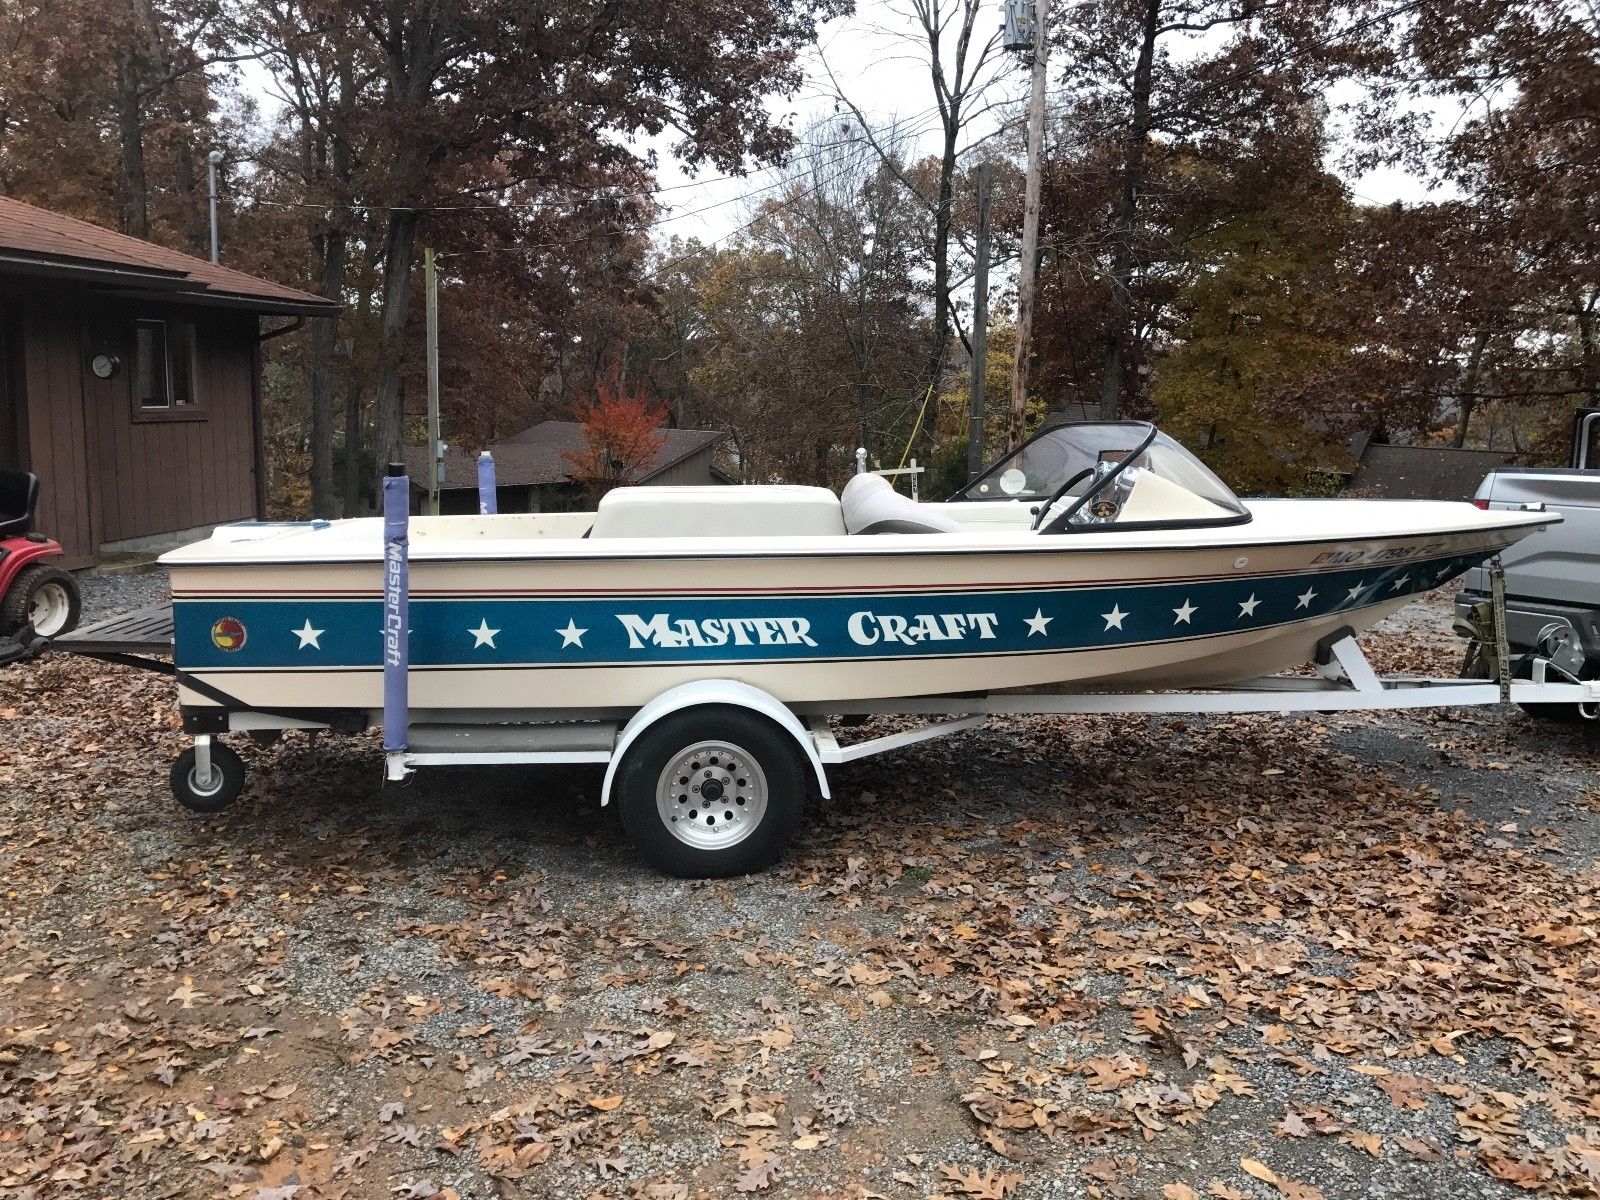 1980 Mastercraft Stars and Stripes for sale1600 x 1200